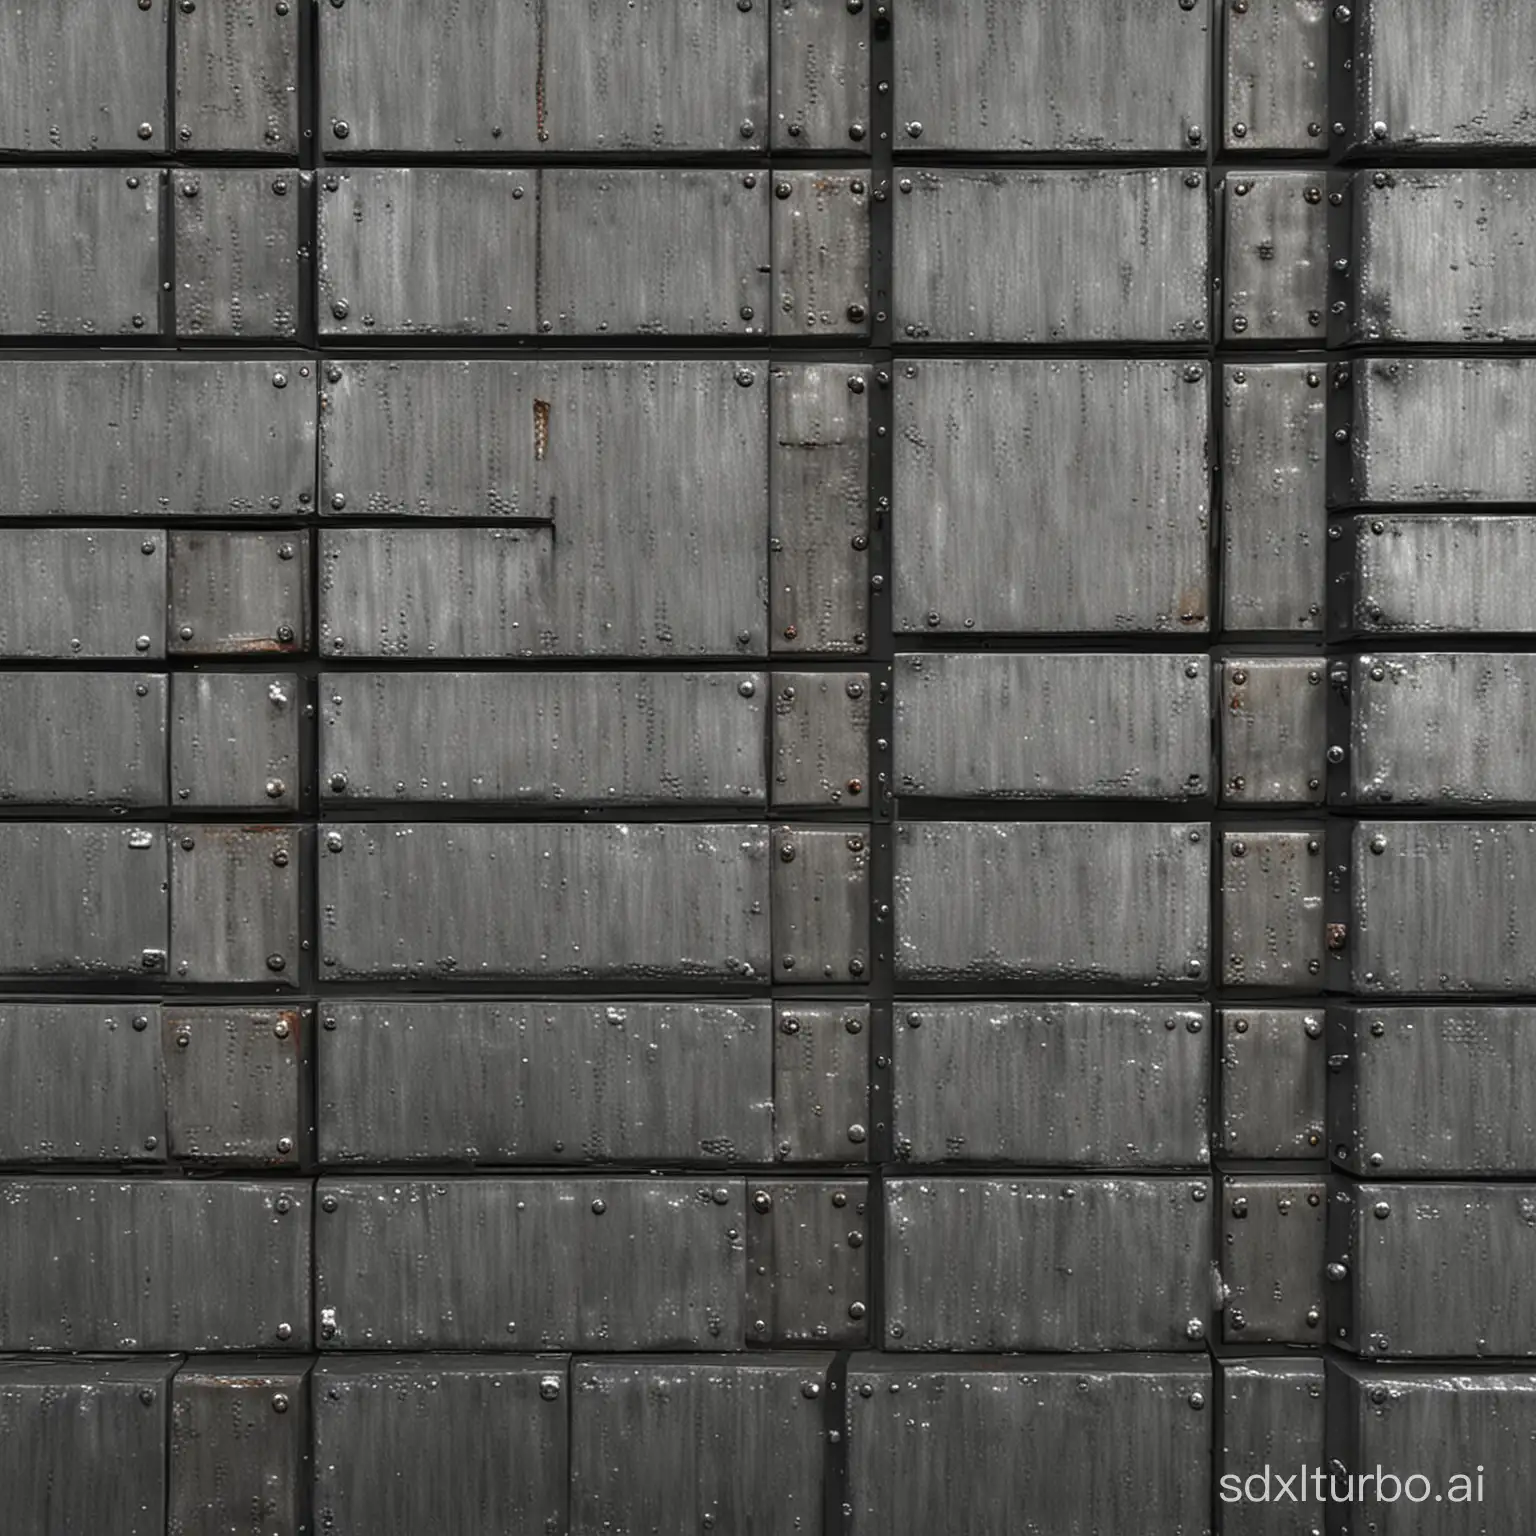 Abstract-Metal-Plates-Texture-Assets-for-Digital-Design